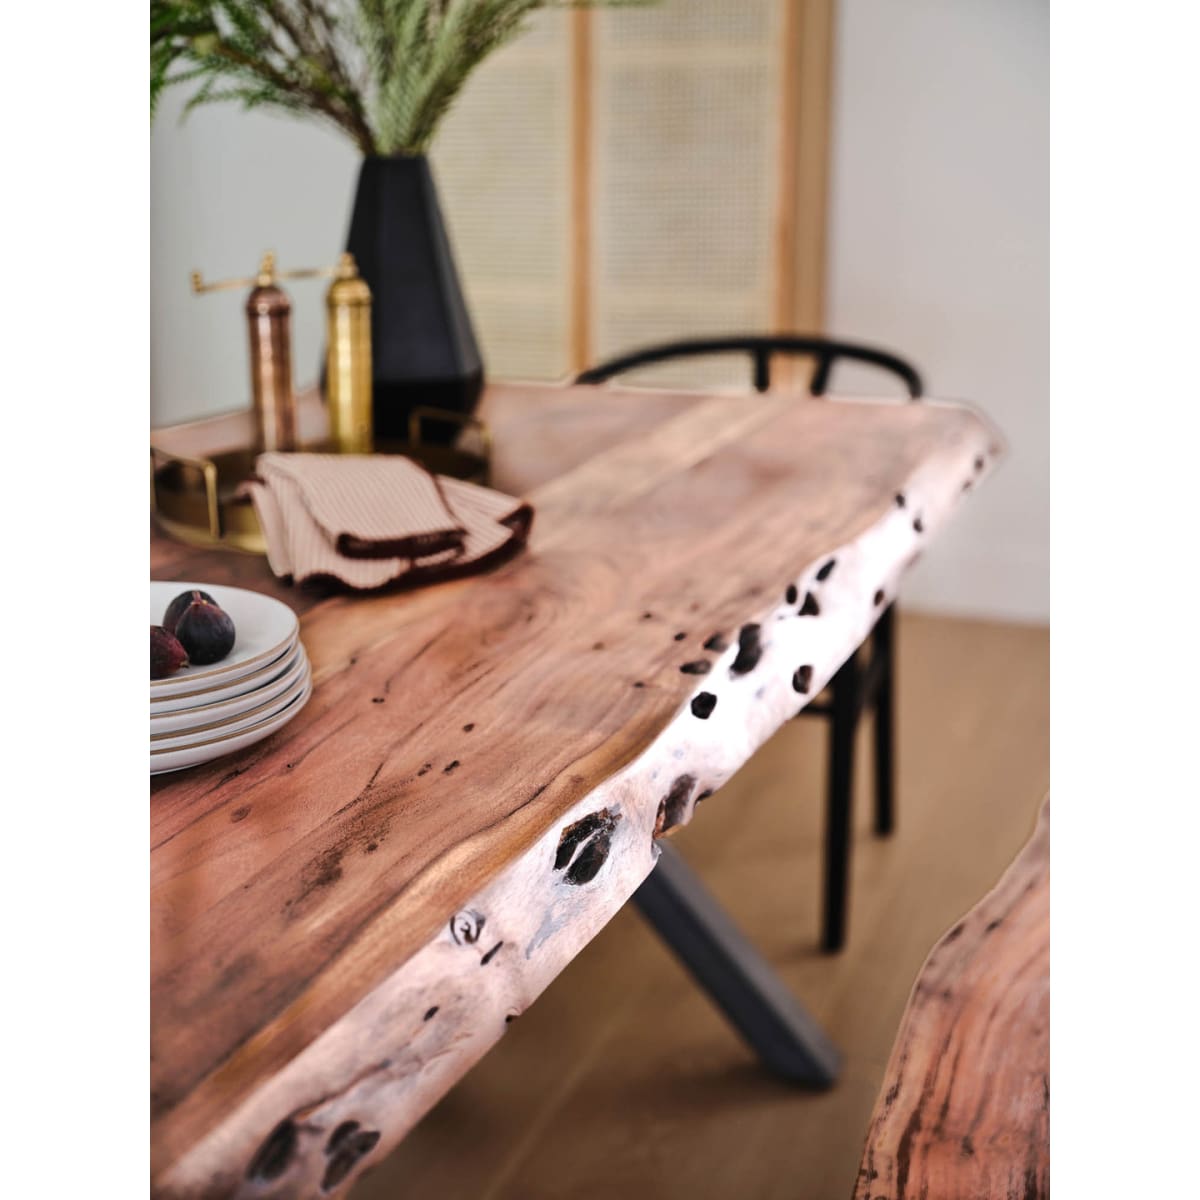 Restore Dining Table 98 - lh-import-dining-tables